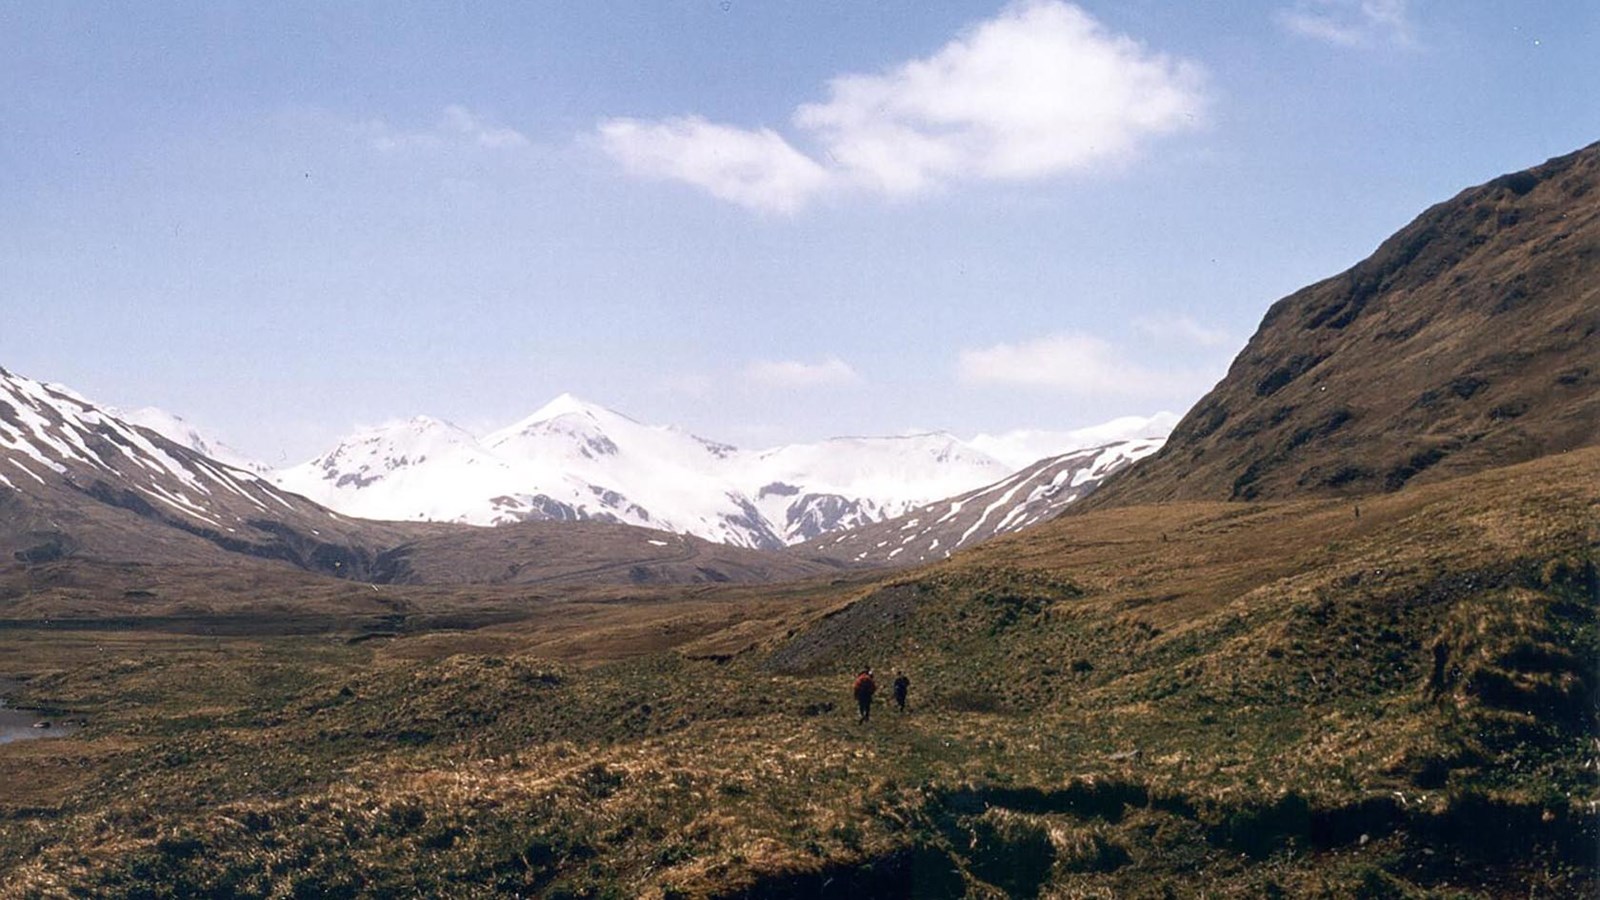 A green meadow with snow peaked hill tops in the background.